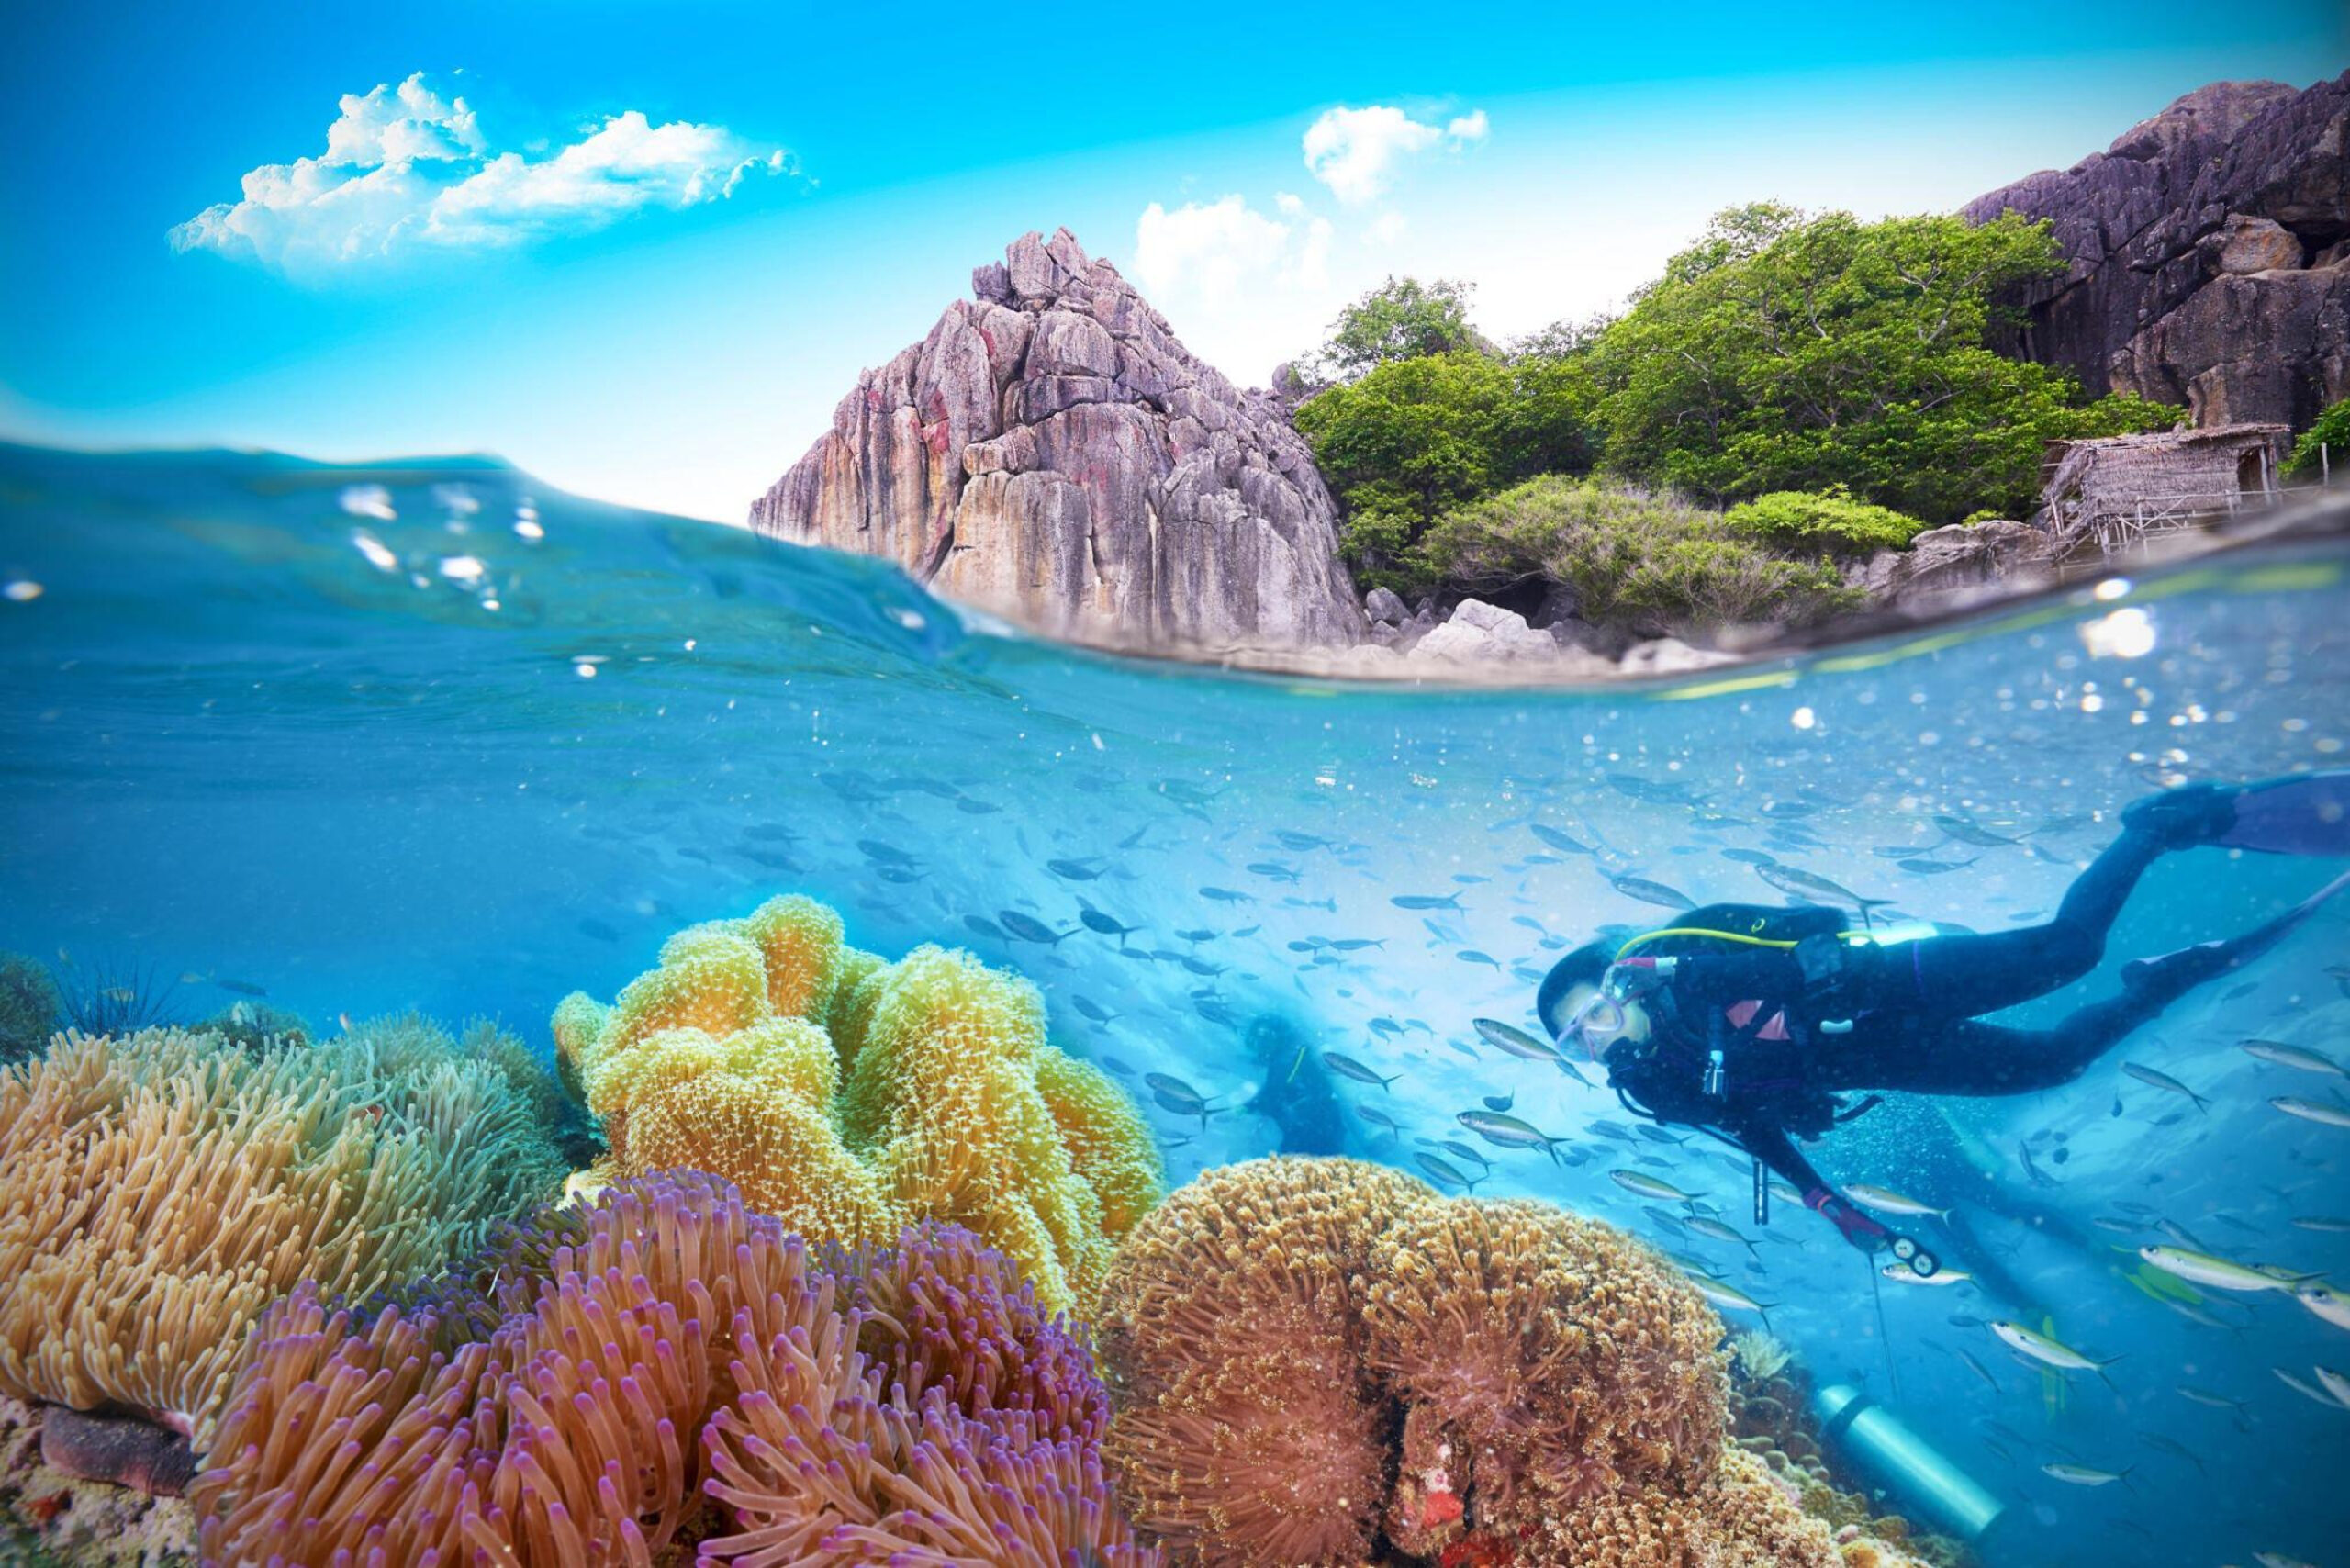 Scuba Diving in Thailand - Photo by Istock at Istock